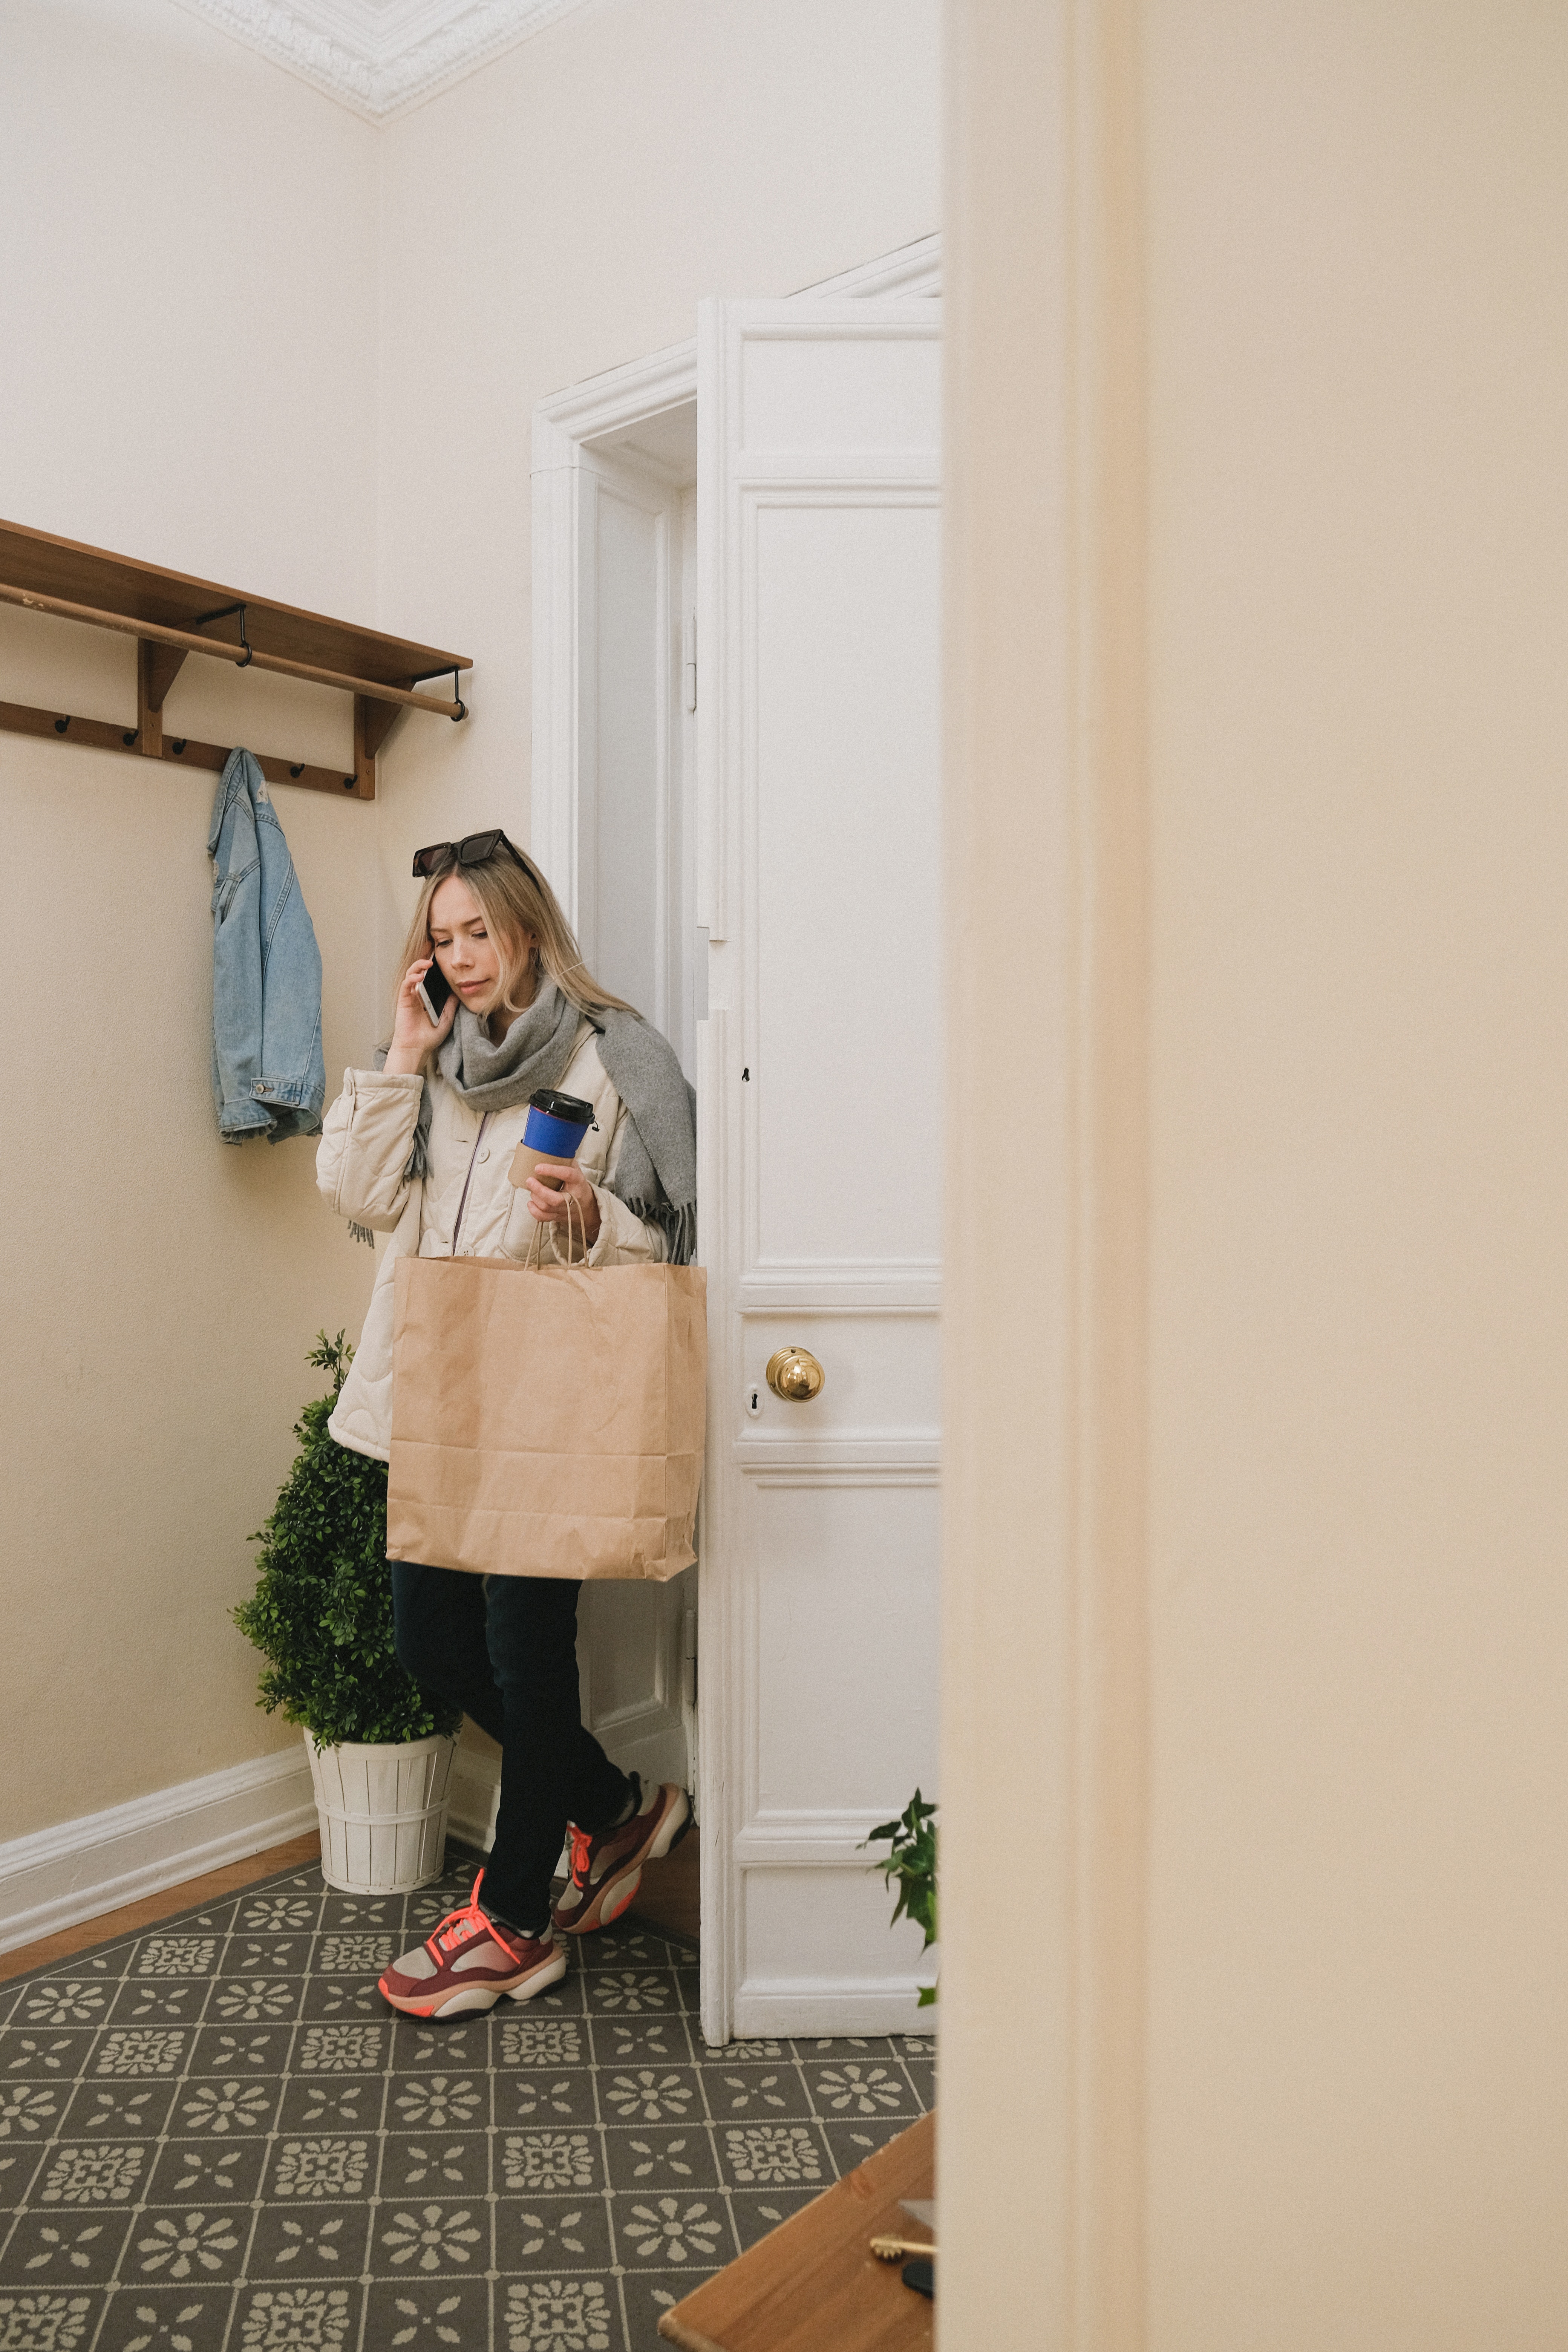 Woman coming into her home or apartment while talking on the phone and carrying a bag.